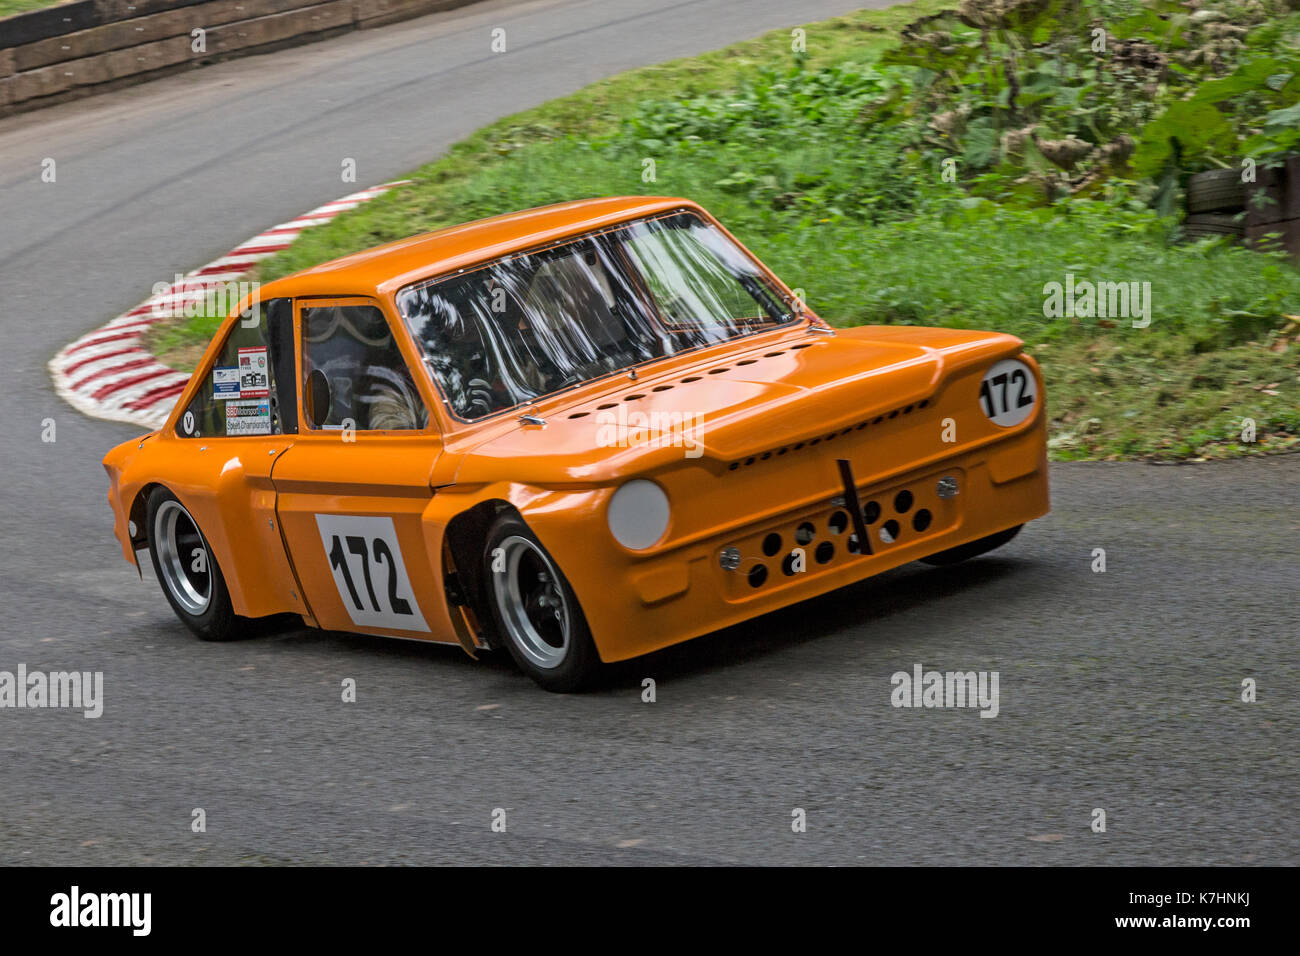 Worcestershire, UK. 16th September, 2017. A Rawlson Spaceframe Stiletto, a converted Hillman Imp, being raced by Paul Batey at the Autumen Speed Finale at Shelsley Walsh in Worcestershire, England, on Saturday 16th September. Credit: Rob Carter/Alamy Live News Stock Photo